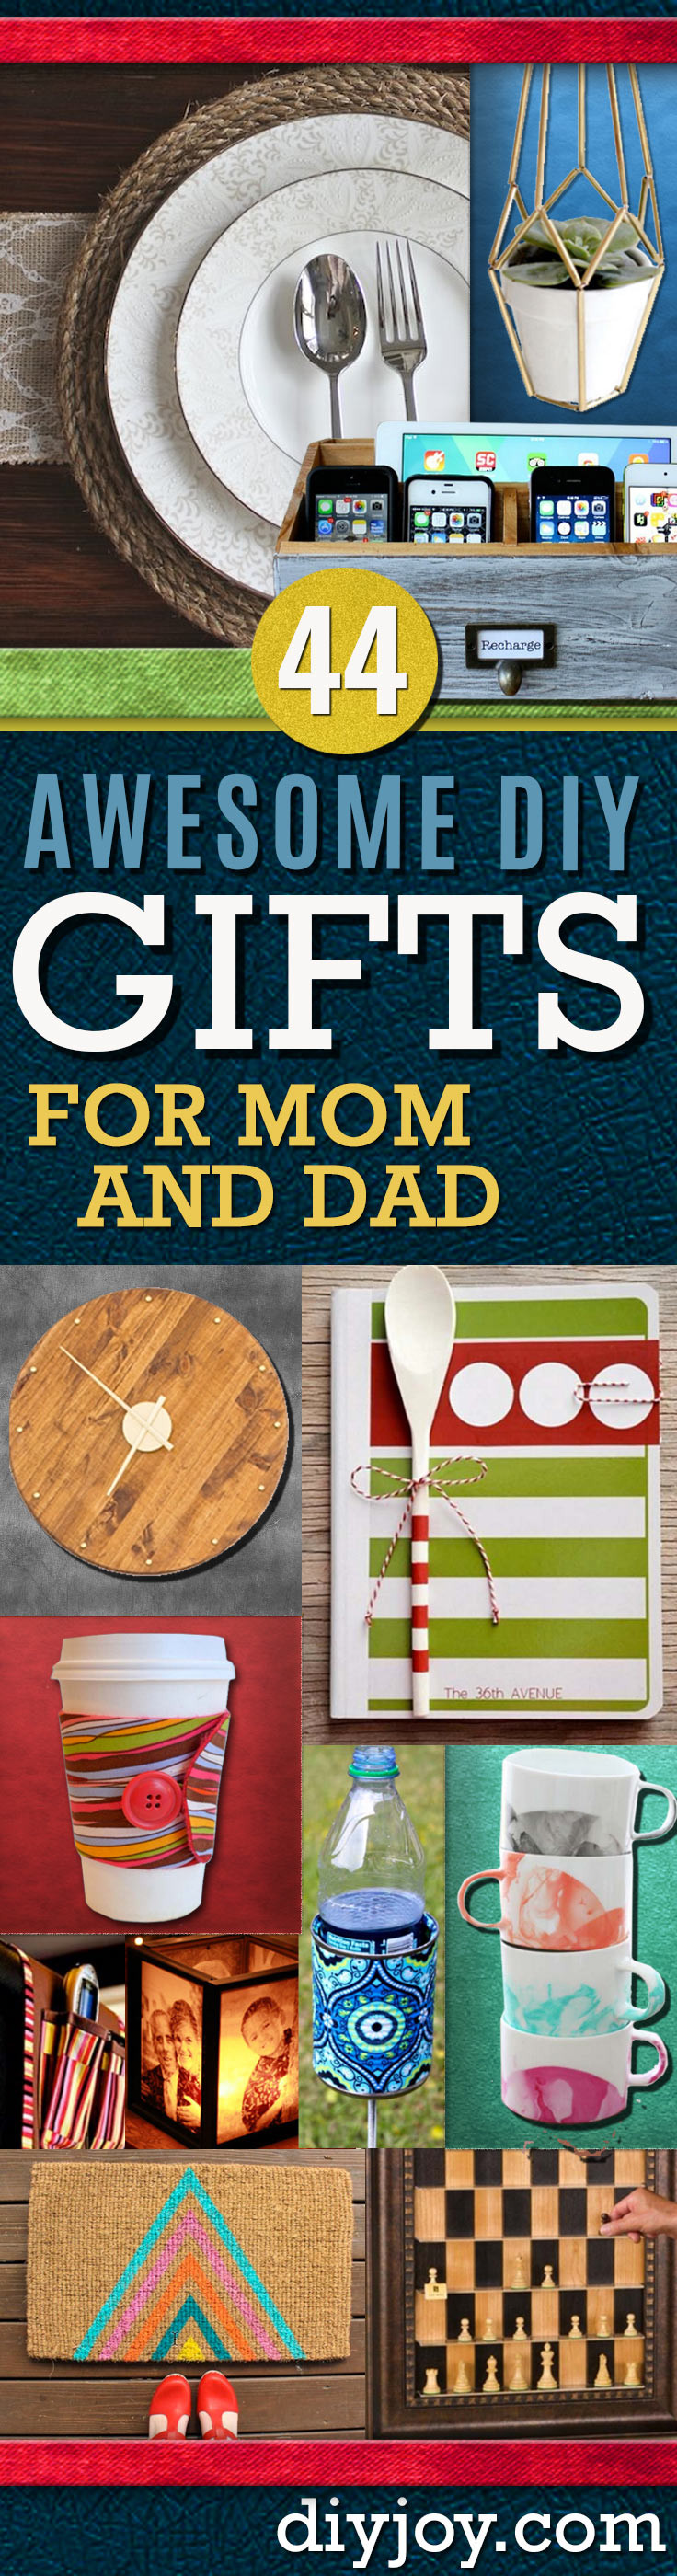 DIY Christmas Gifts For Mom
 Awesome DIY Gift Ideas Mom and Dad Will Love